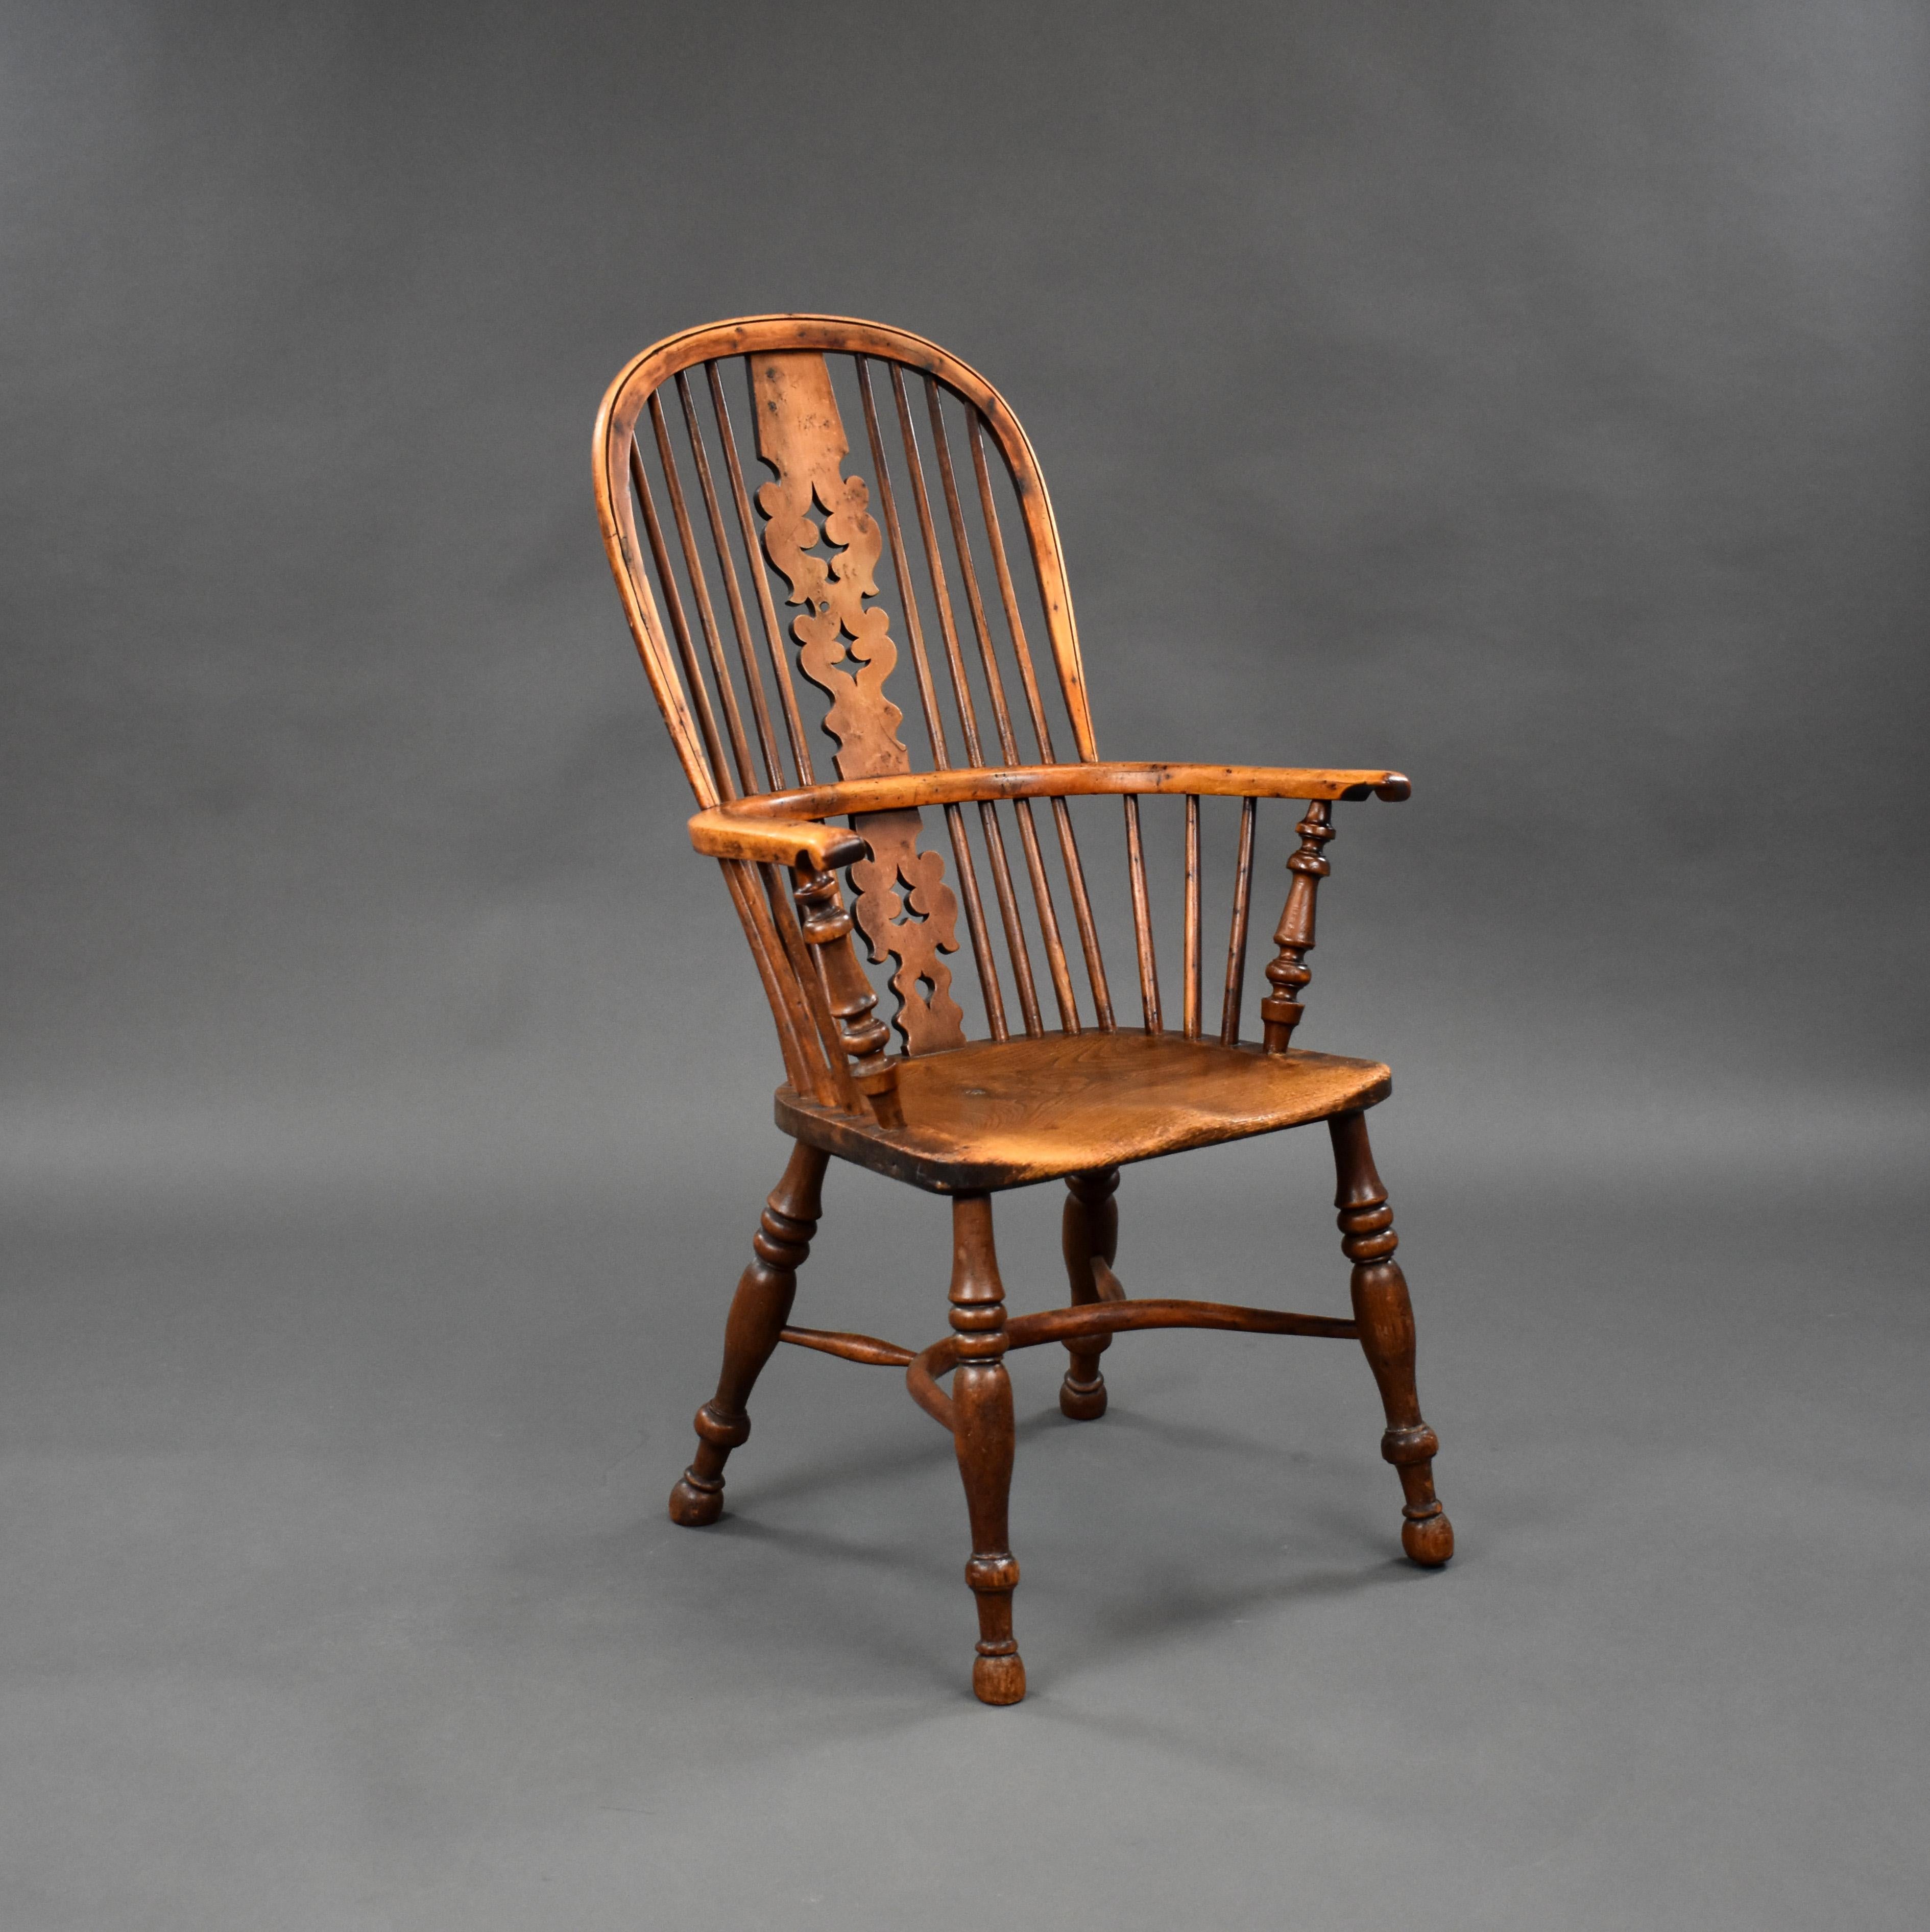 For sale is a good quality 19th century yew and elm high back Windsor chair, with a yew wood splat back above elm seat, standing on turned legs united by a stretcher. The chair retains a superb colour and is in very good, structurally sound,